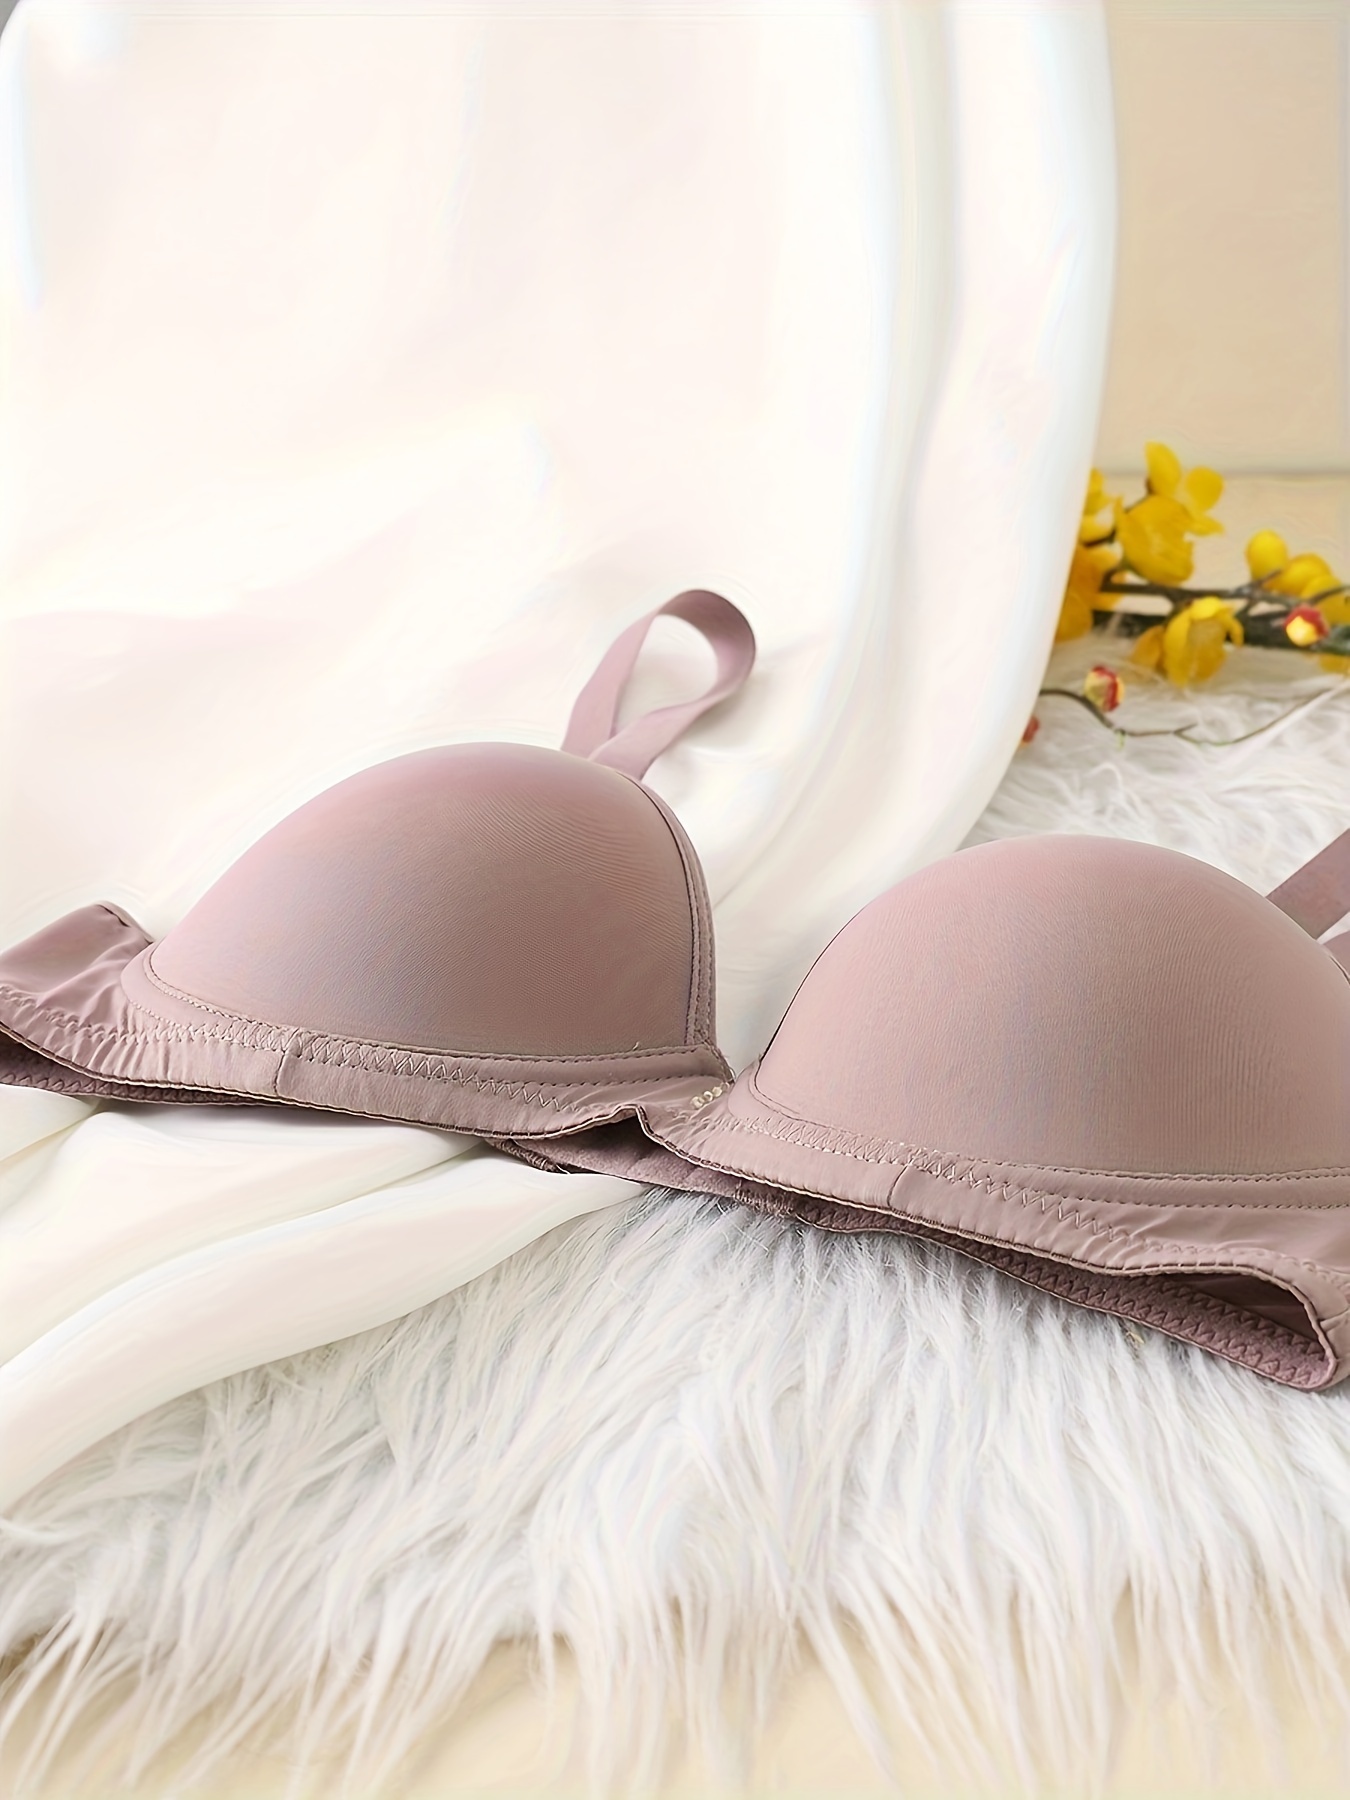 2Pieces LeeWear Everyday Use wireless non padded t-shirt bra cotton spandex  Red Black Apricot Pink color comfortable lingerie Women's Love The Lift  Push Up & in Demi Bra Everyday 01_06_06BR22105_Qty02